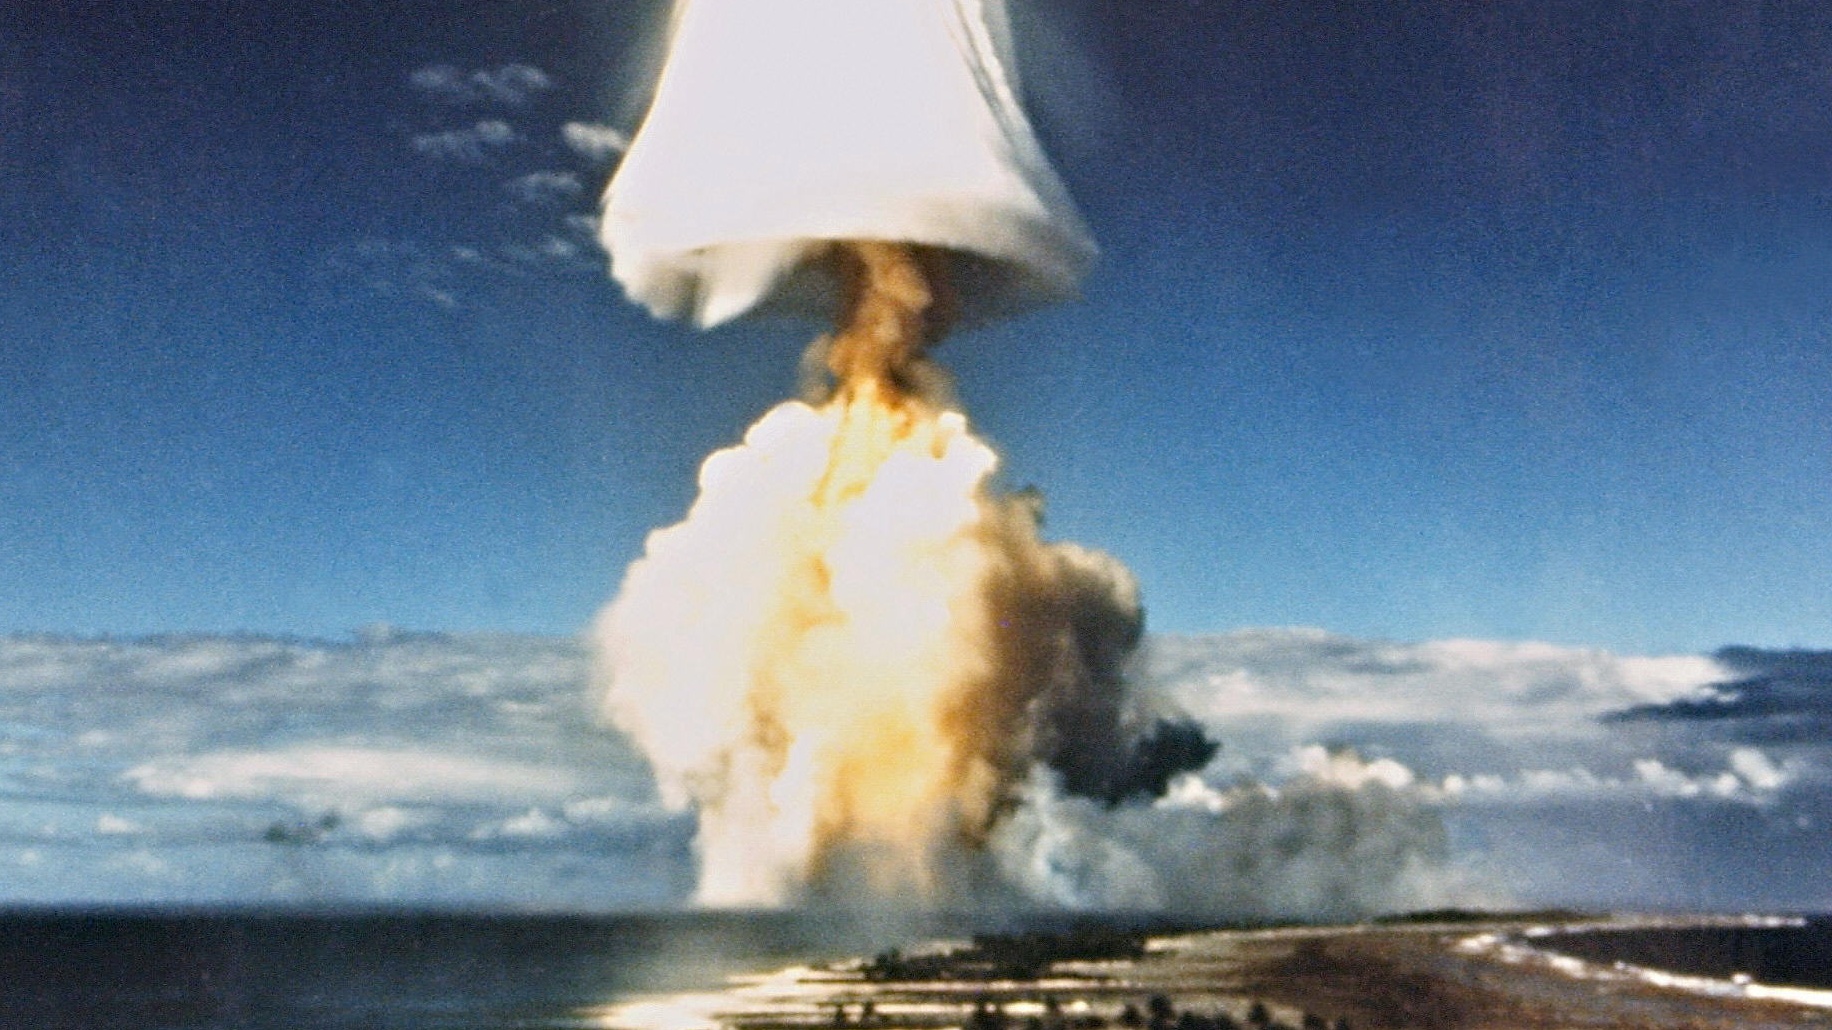 A French nuclear test in French Polynesia in the 1970s